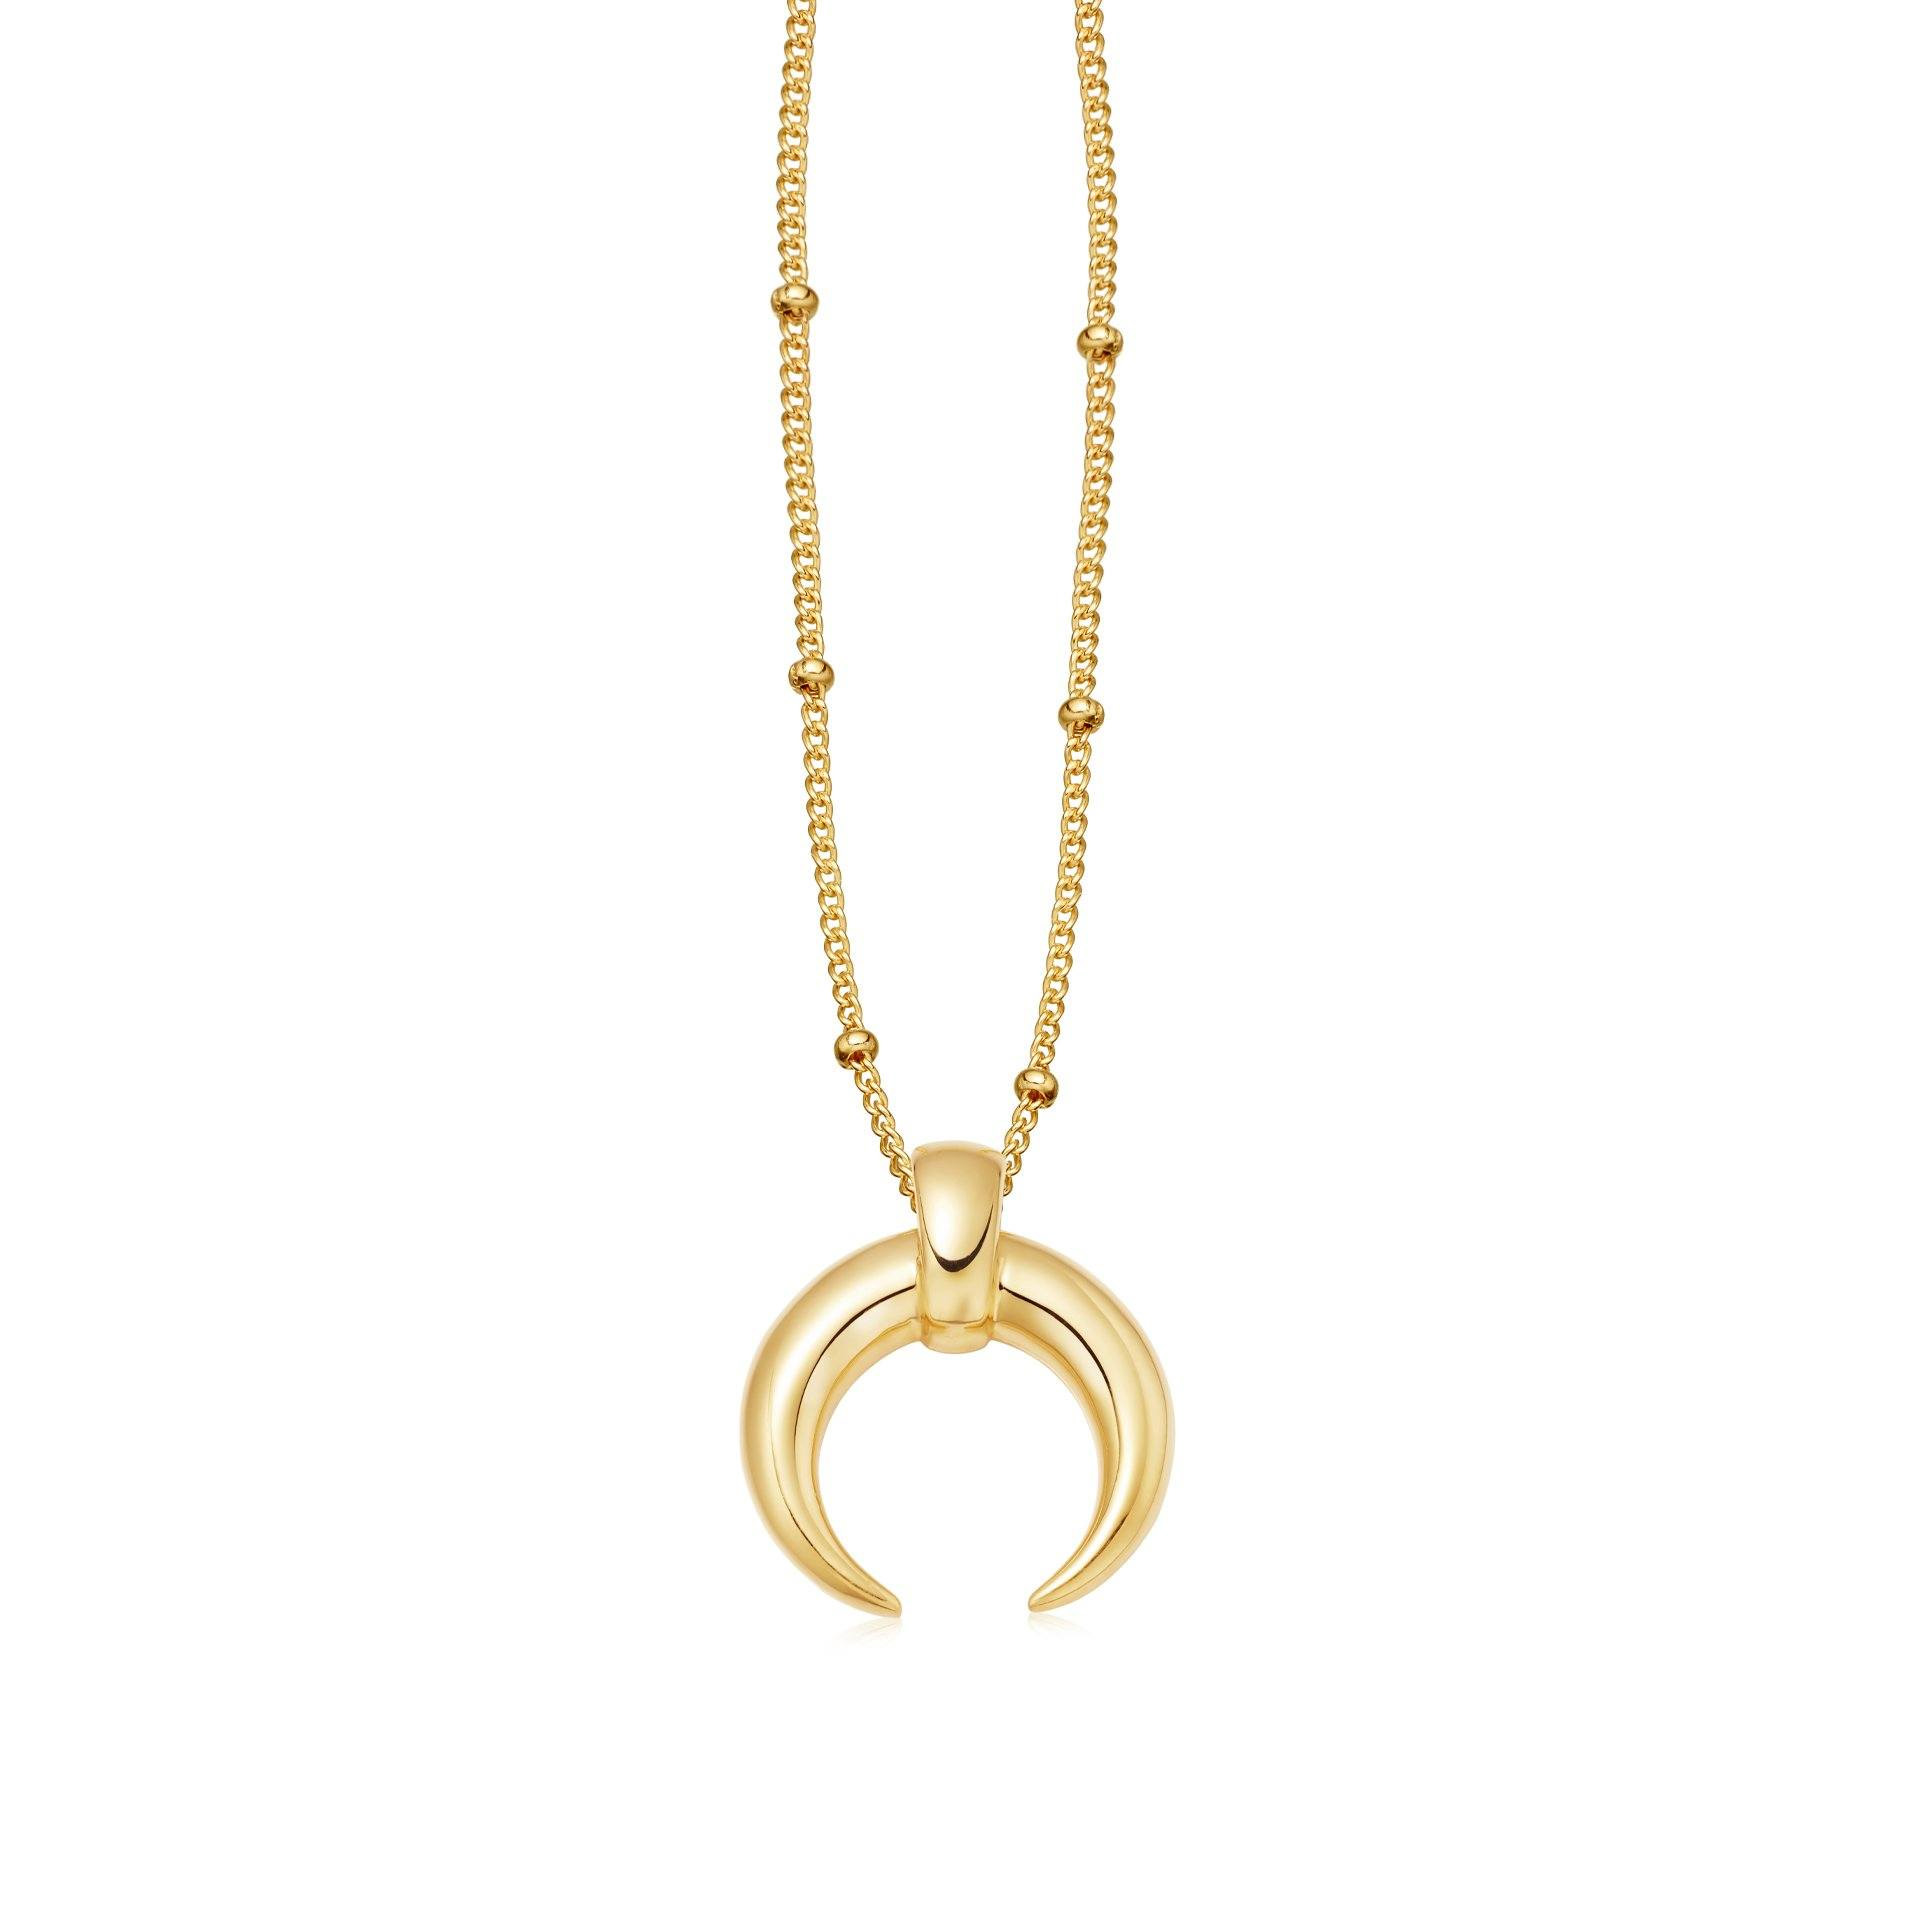 Wholesale OEM/ODM Jewelry design 18ct gold-vermeil horn on chain necklace Sterling Silver jewelry